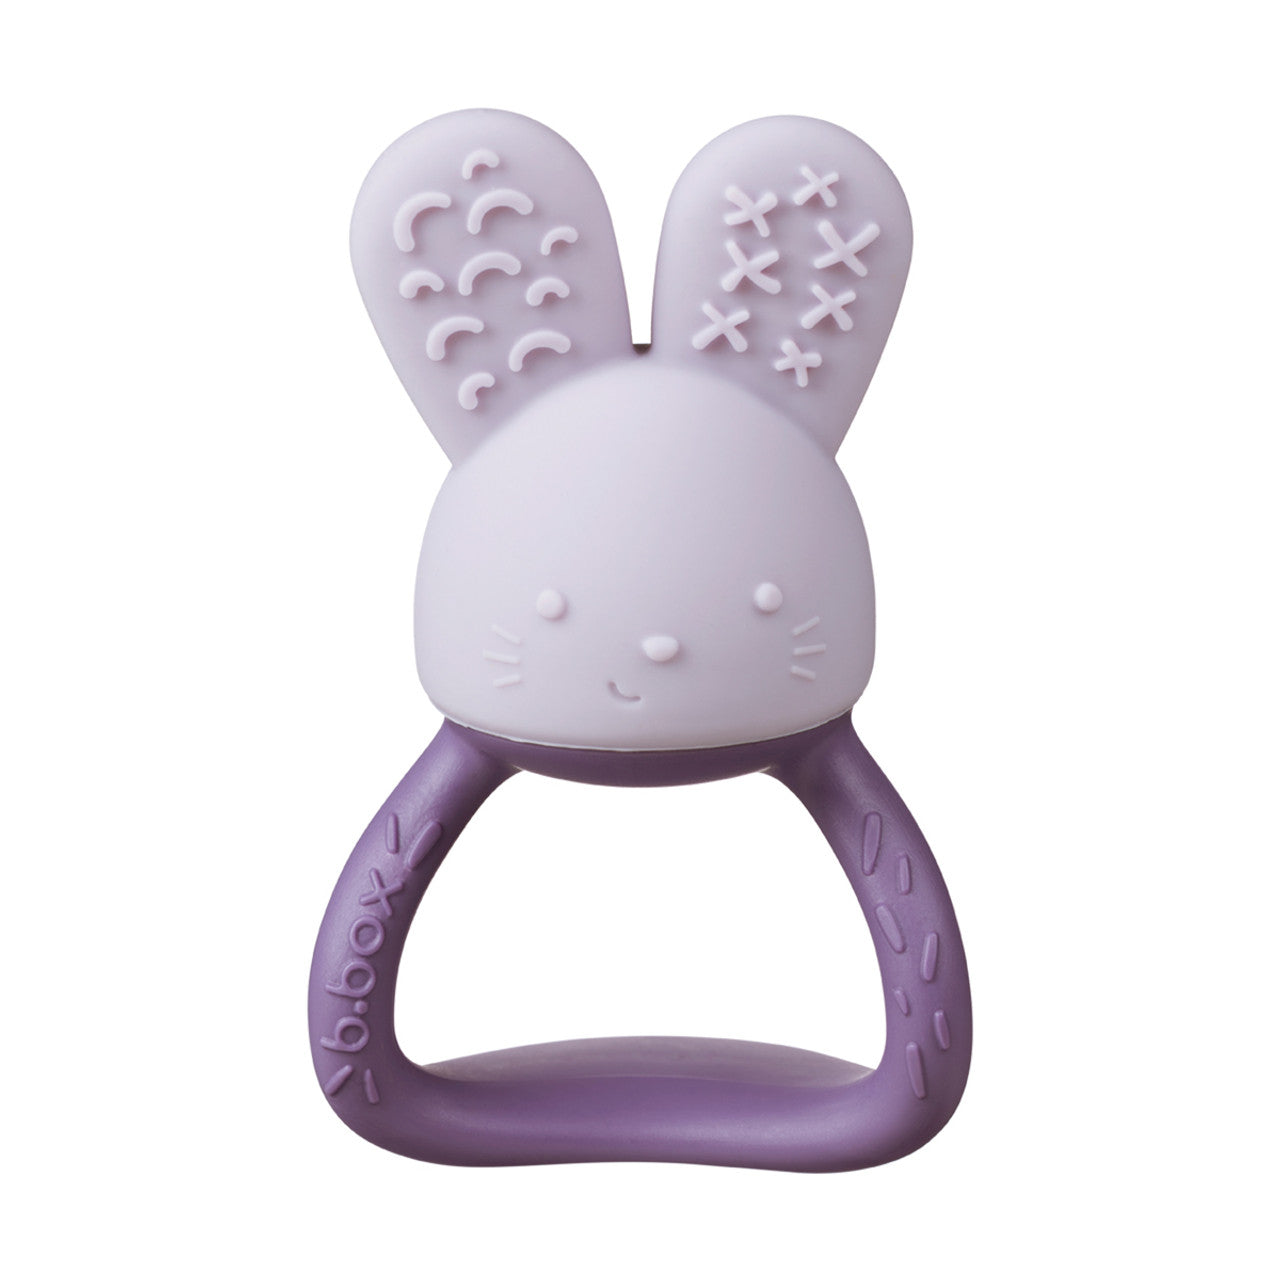 b.box Chill + Fill Teether in Peony available at Bear & Moo